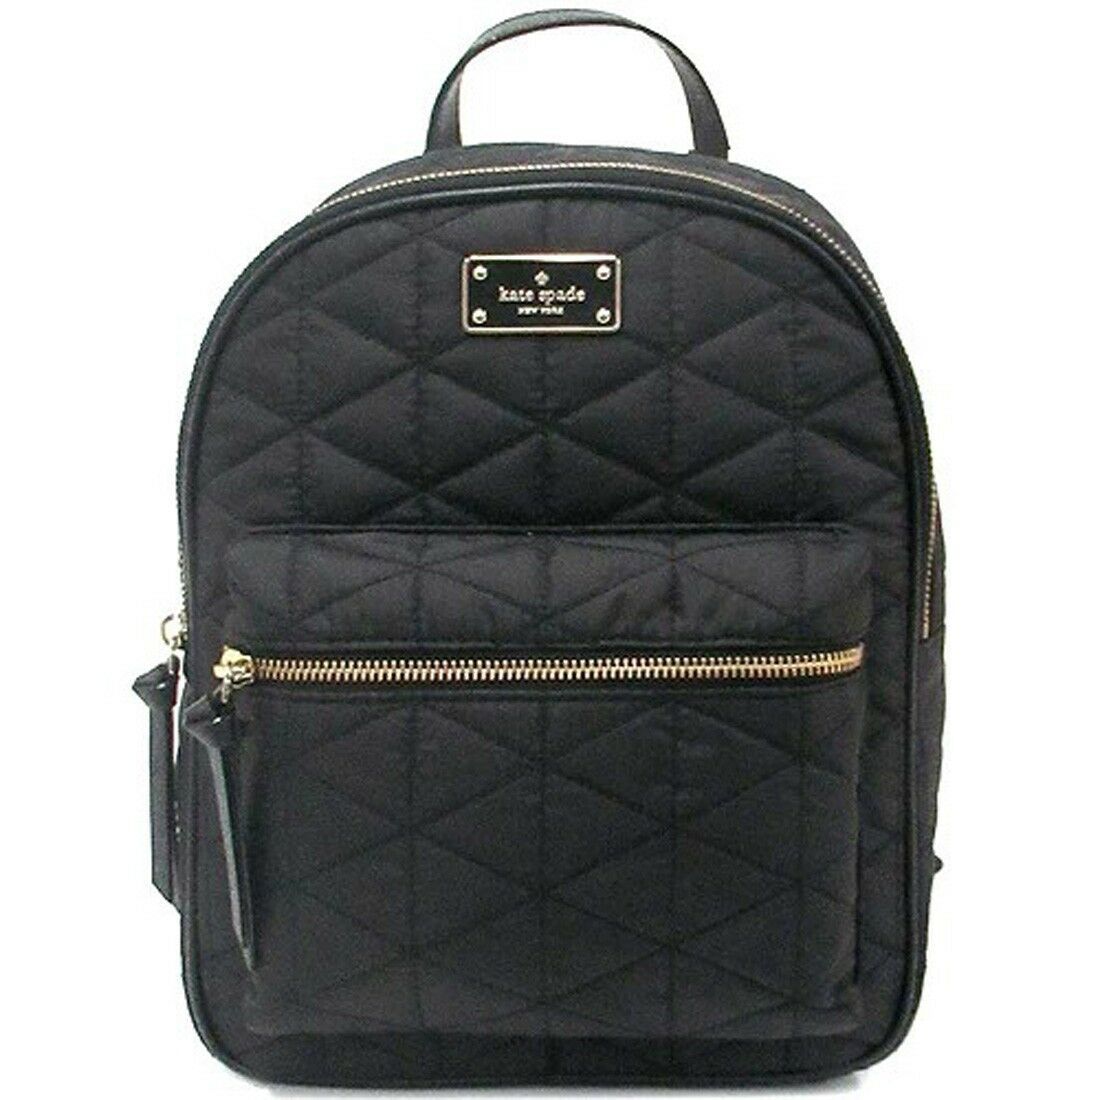 NWT KATE SPADE NEW YORK Wilson Road Quilted Small Bradley Backpack Black 4752 - $156.42